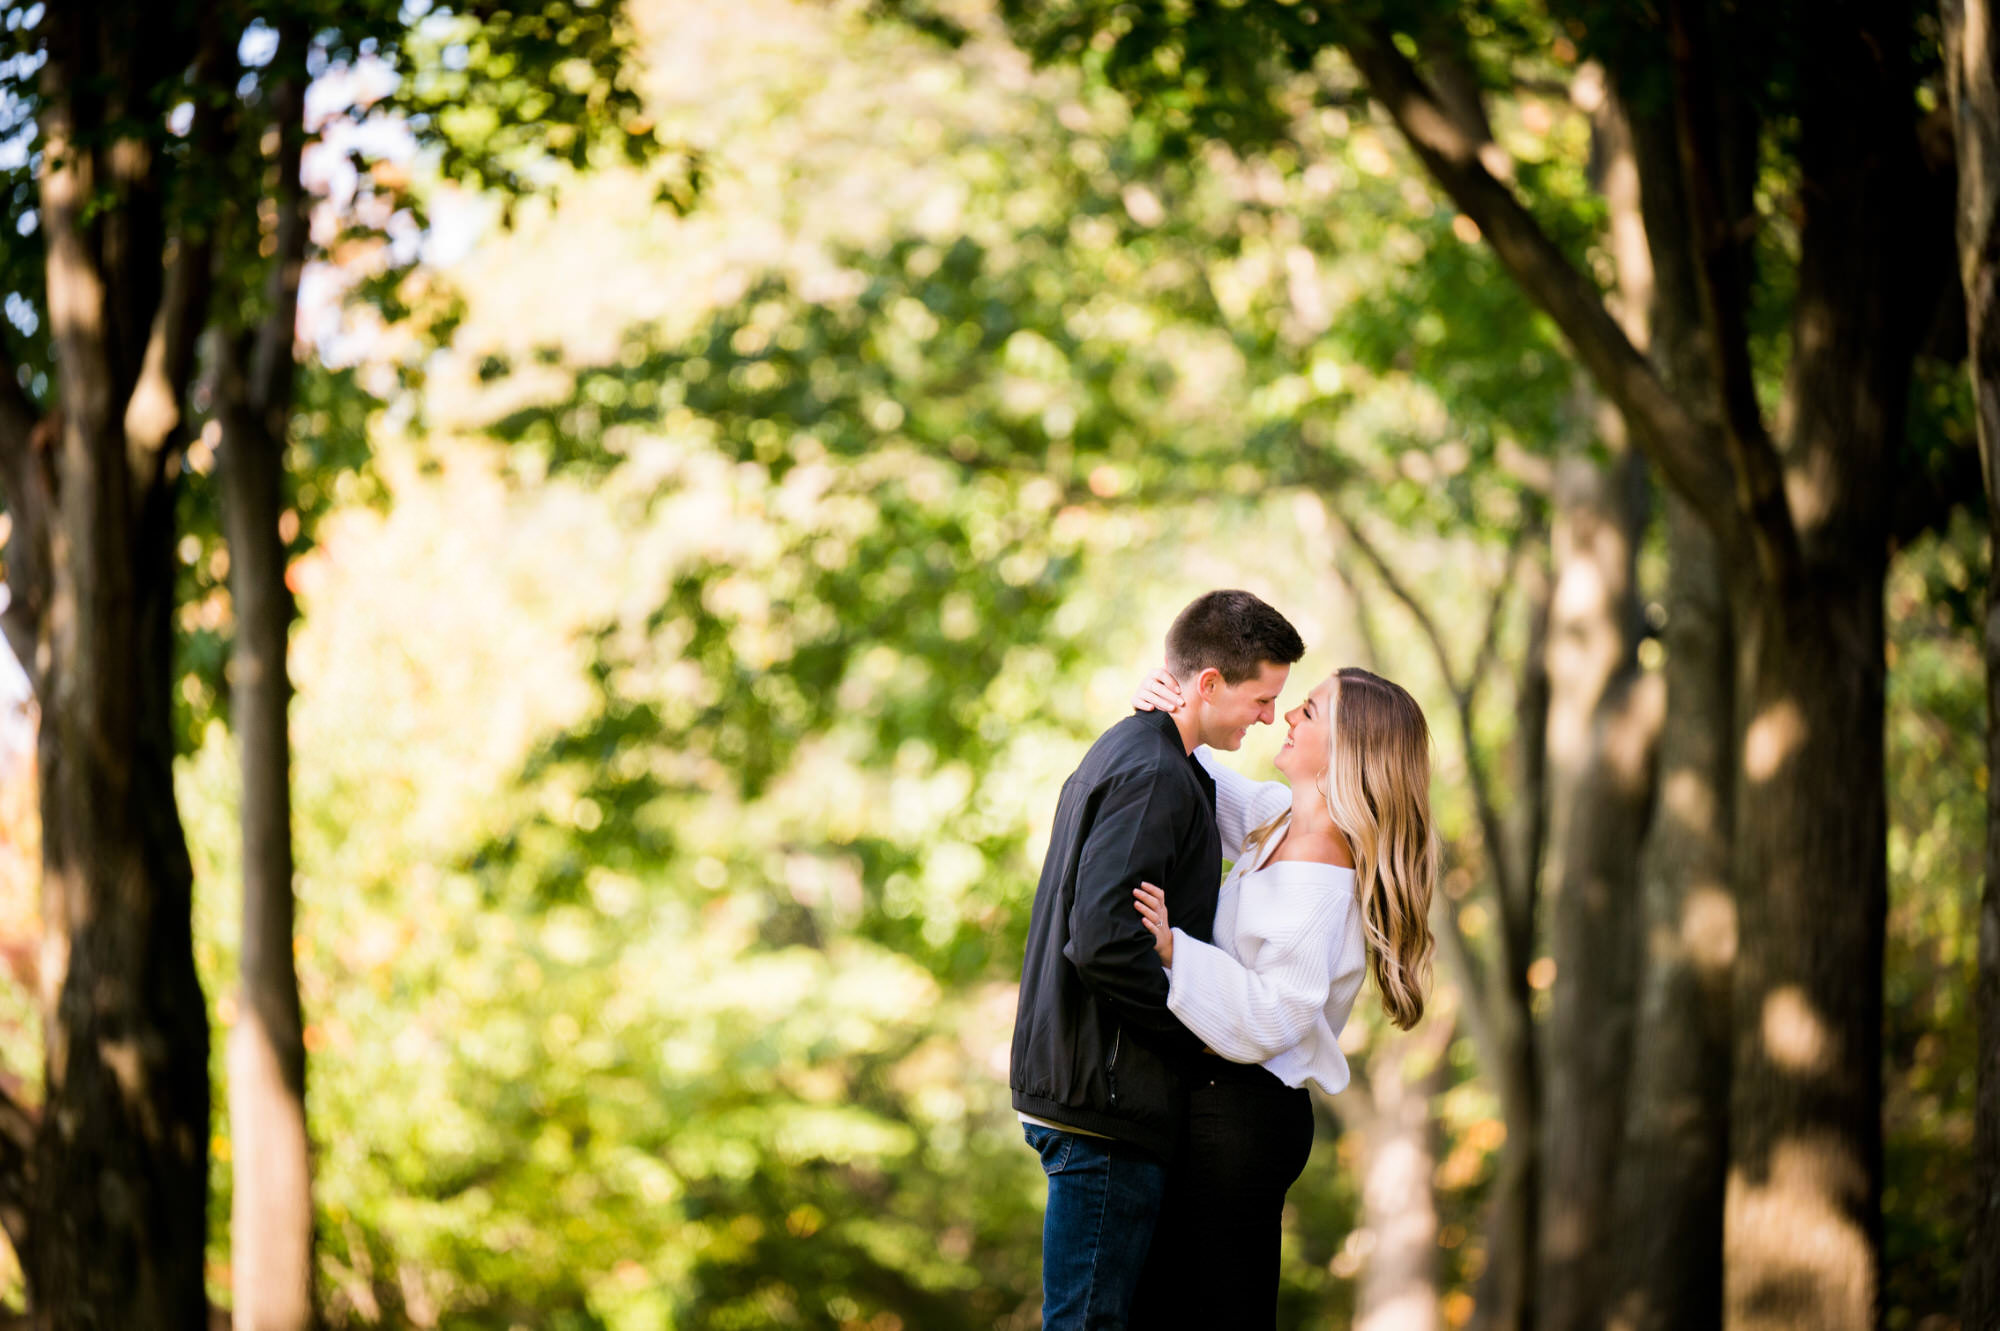 wedding photos from oakmont country club • Engagement Photography - Leeann Marie Photographer Pittsburgh